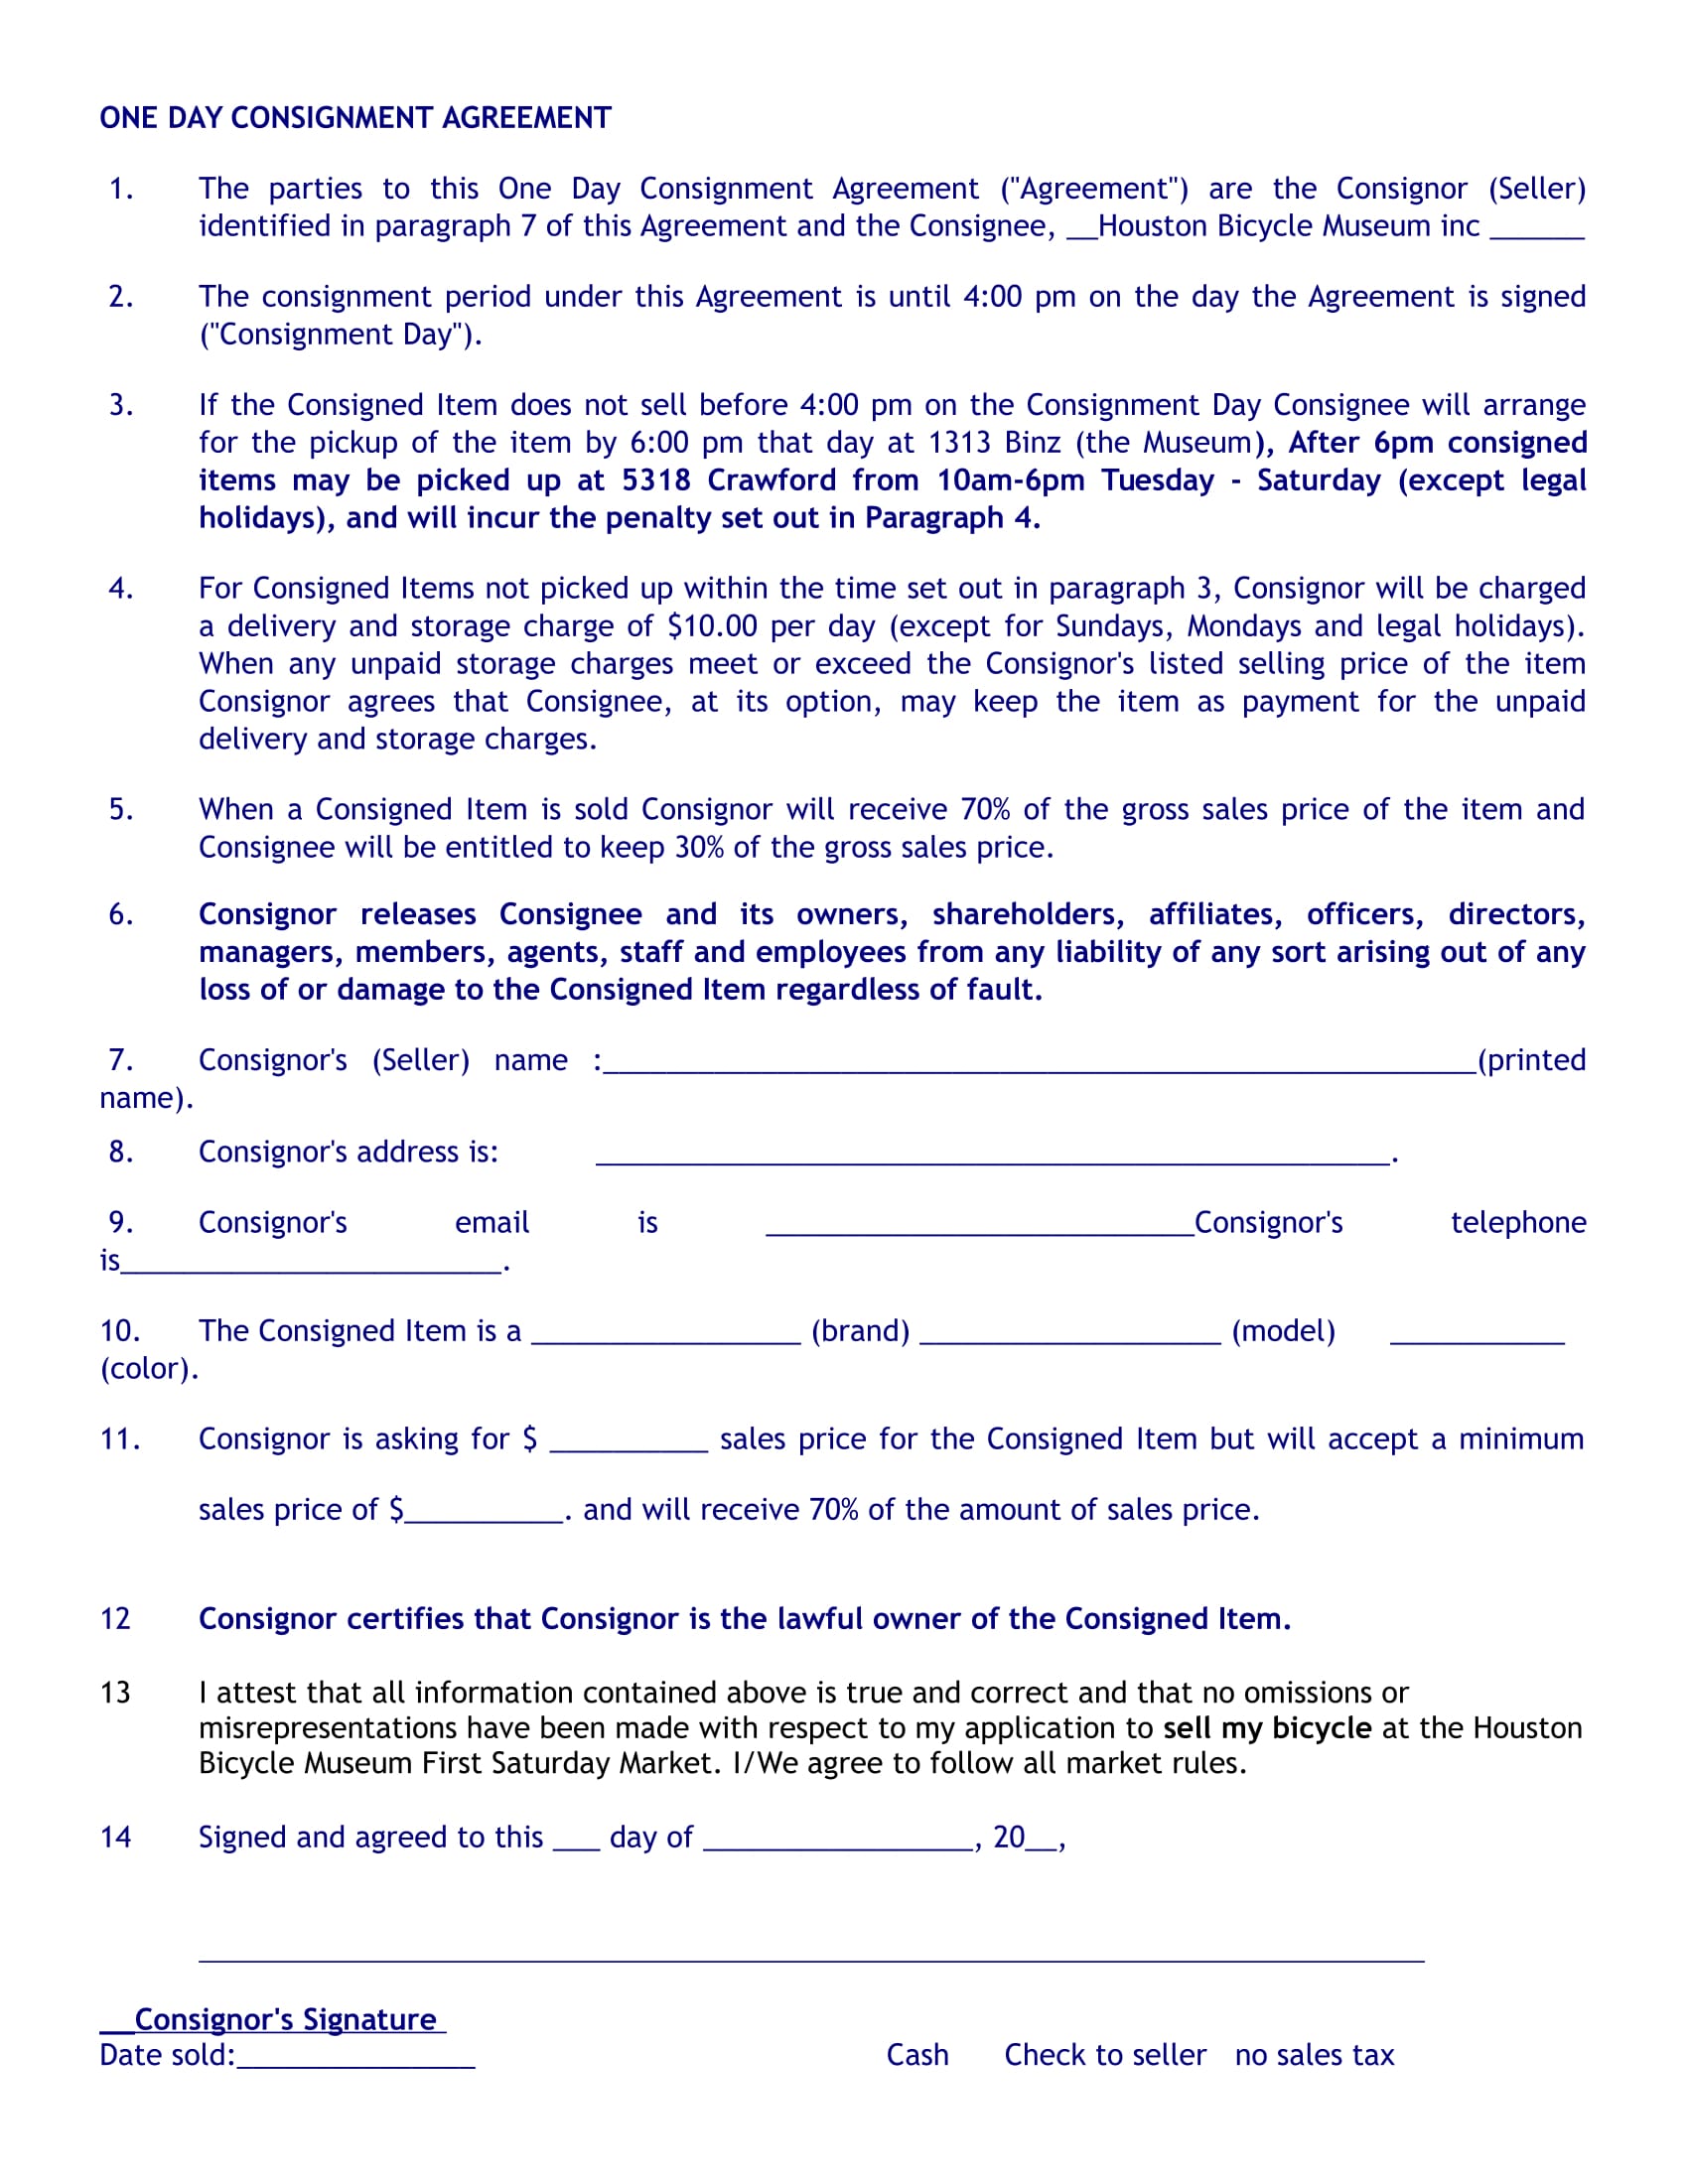 one day consignment agreement example